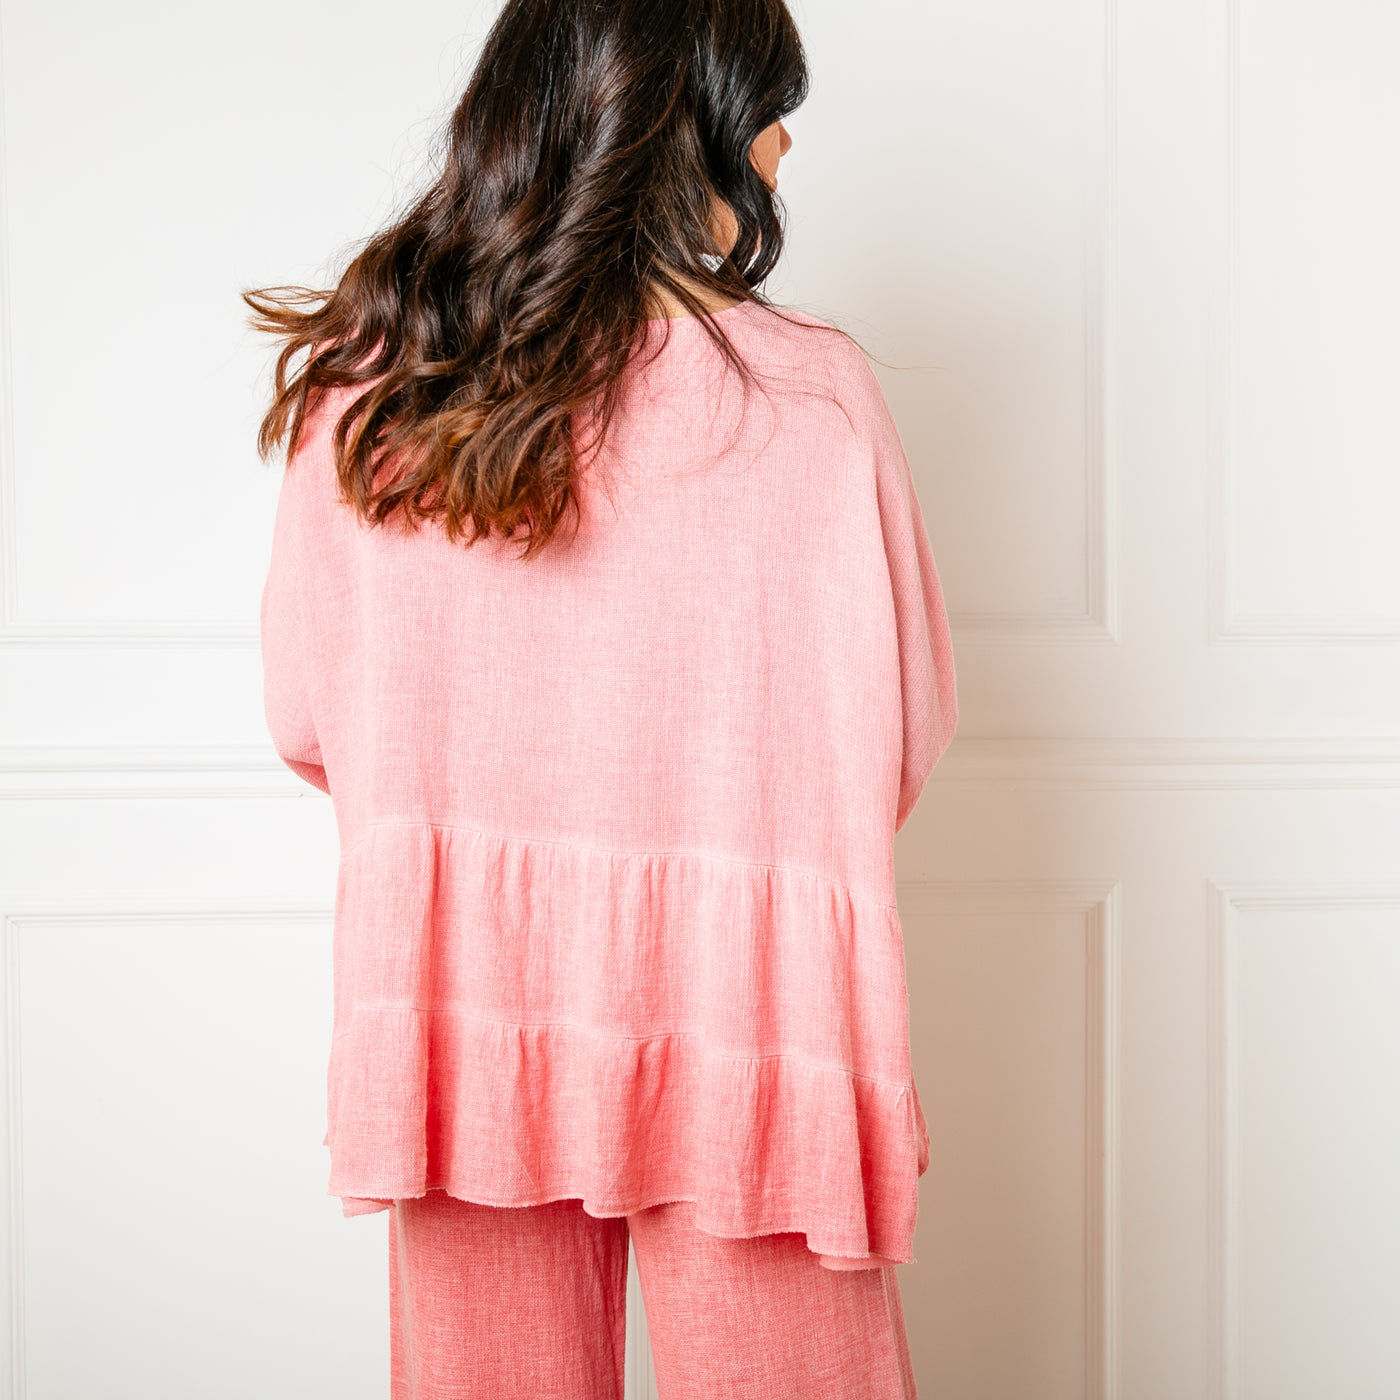 The coral orange Linen Blend Tiered Top made from a mix of cotton and linen for a lightweight relaxed summer look